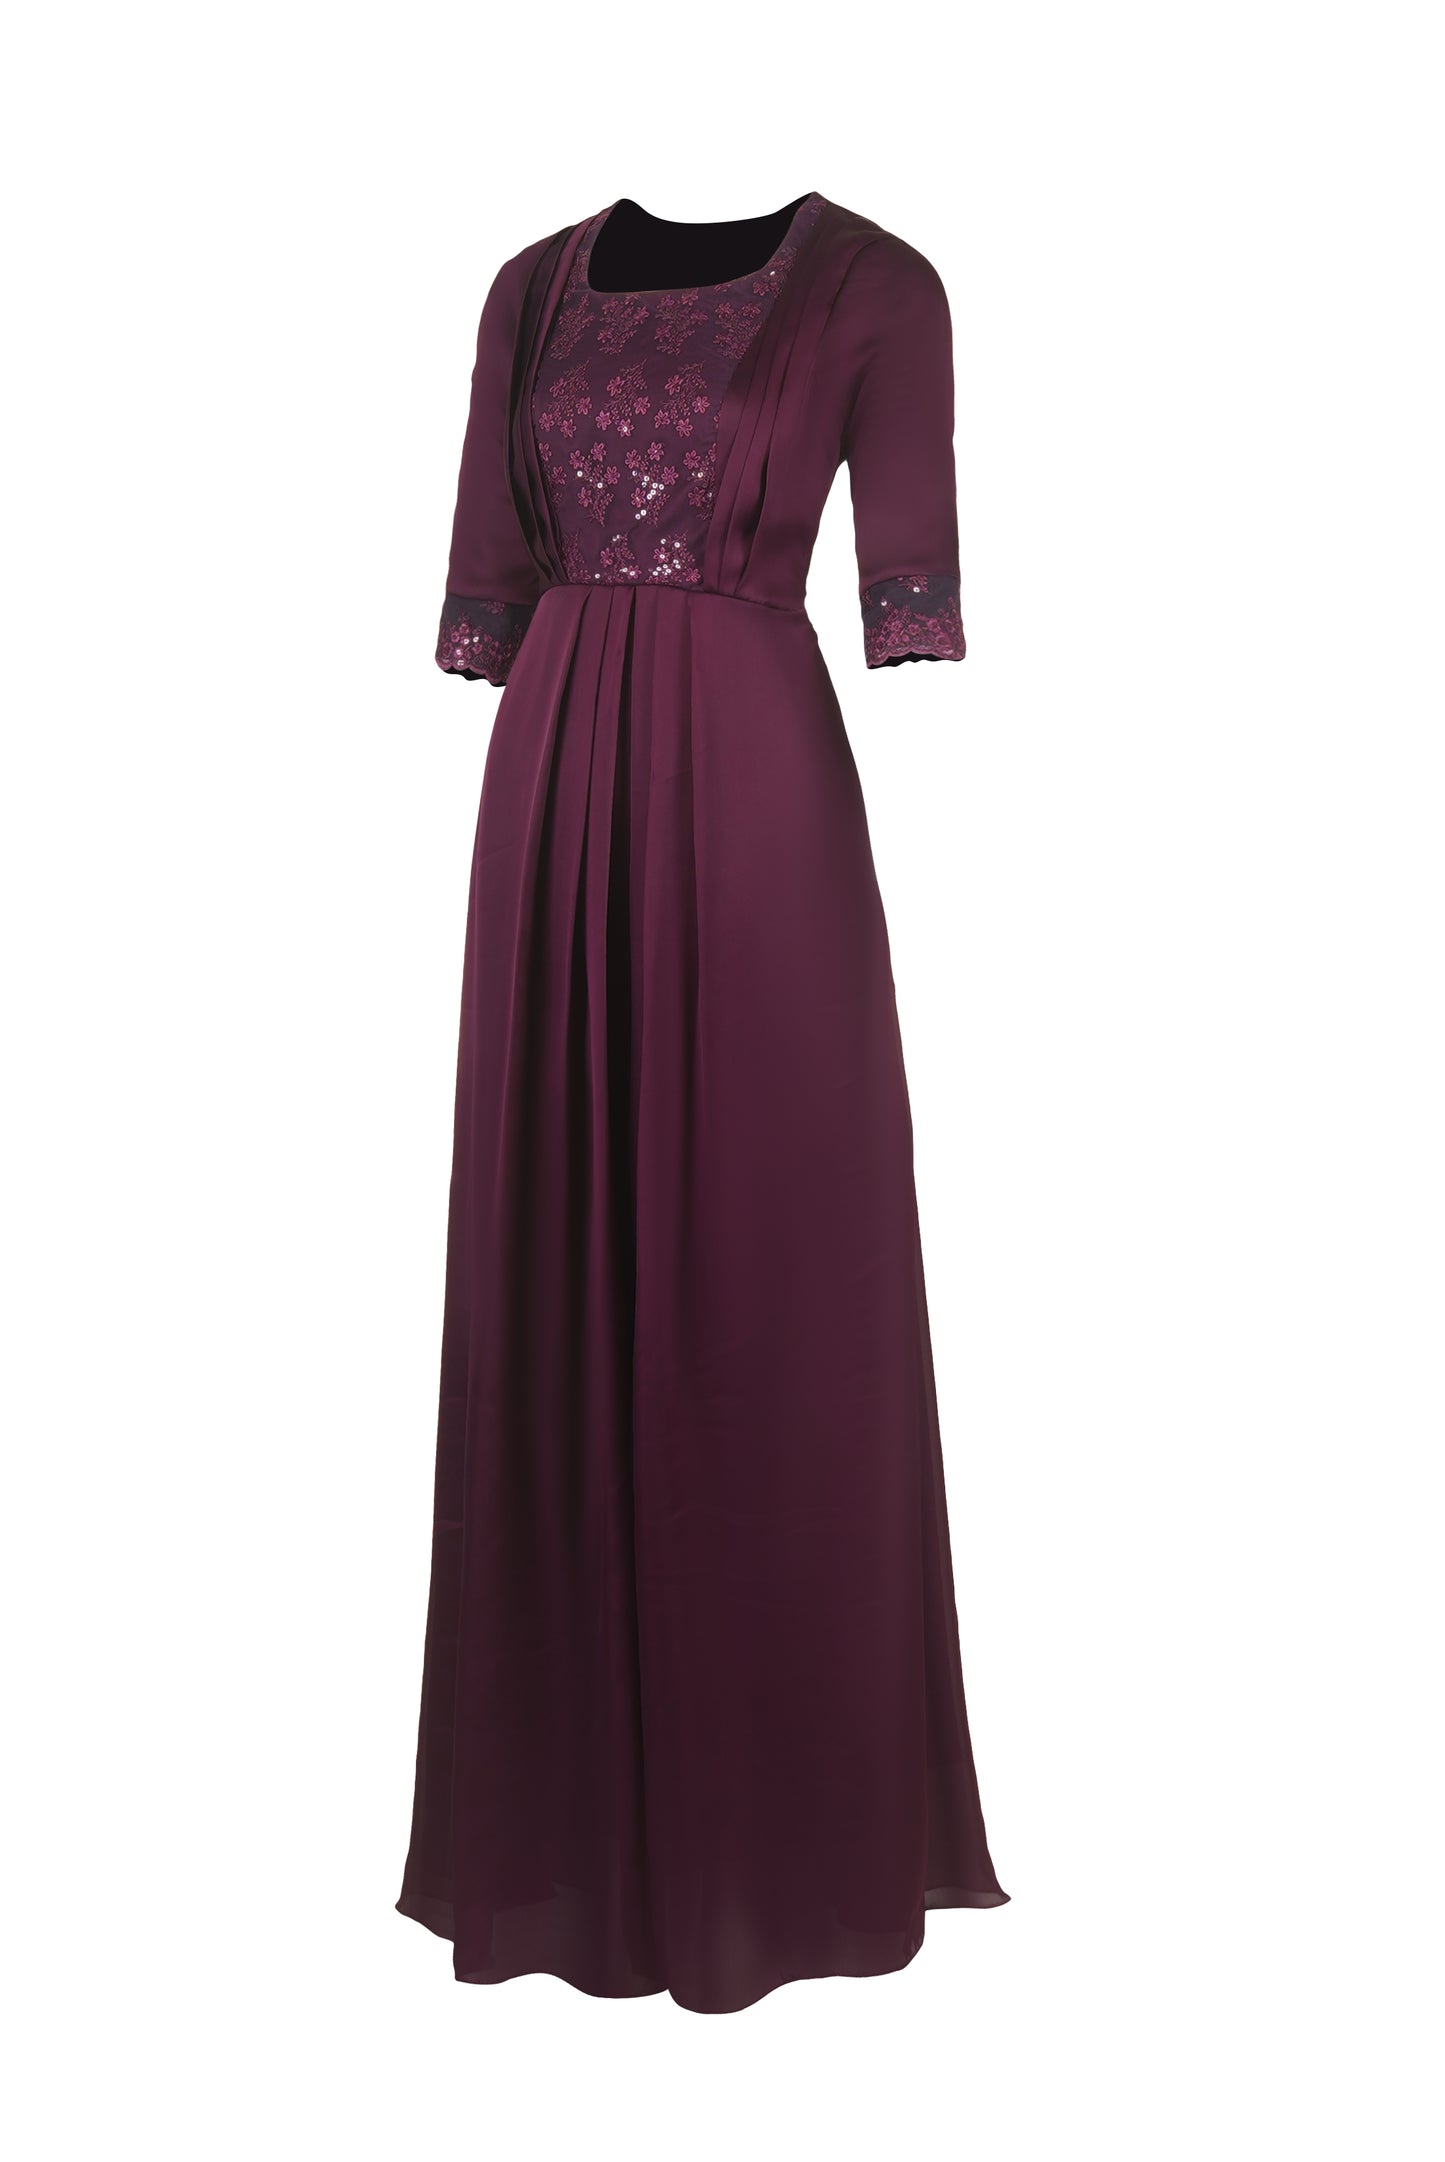 ZIA026 violet Full Length Gown with Netted Yoke